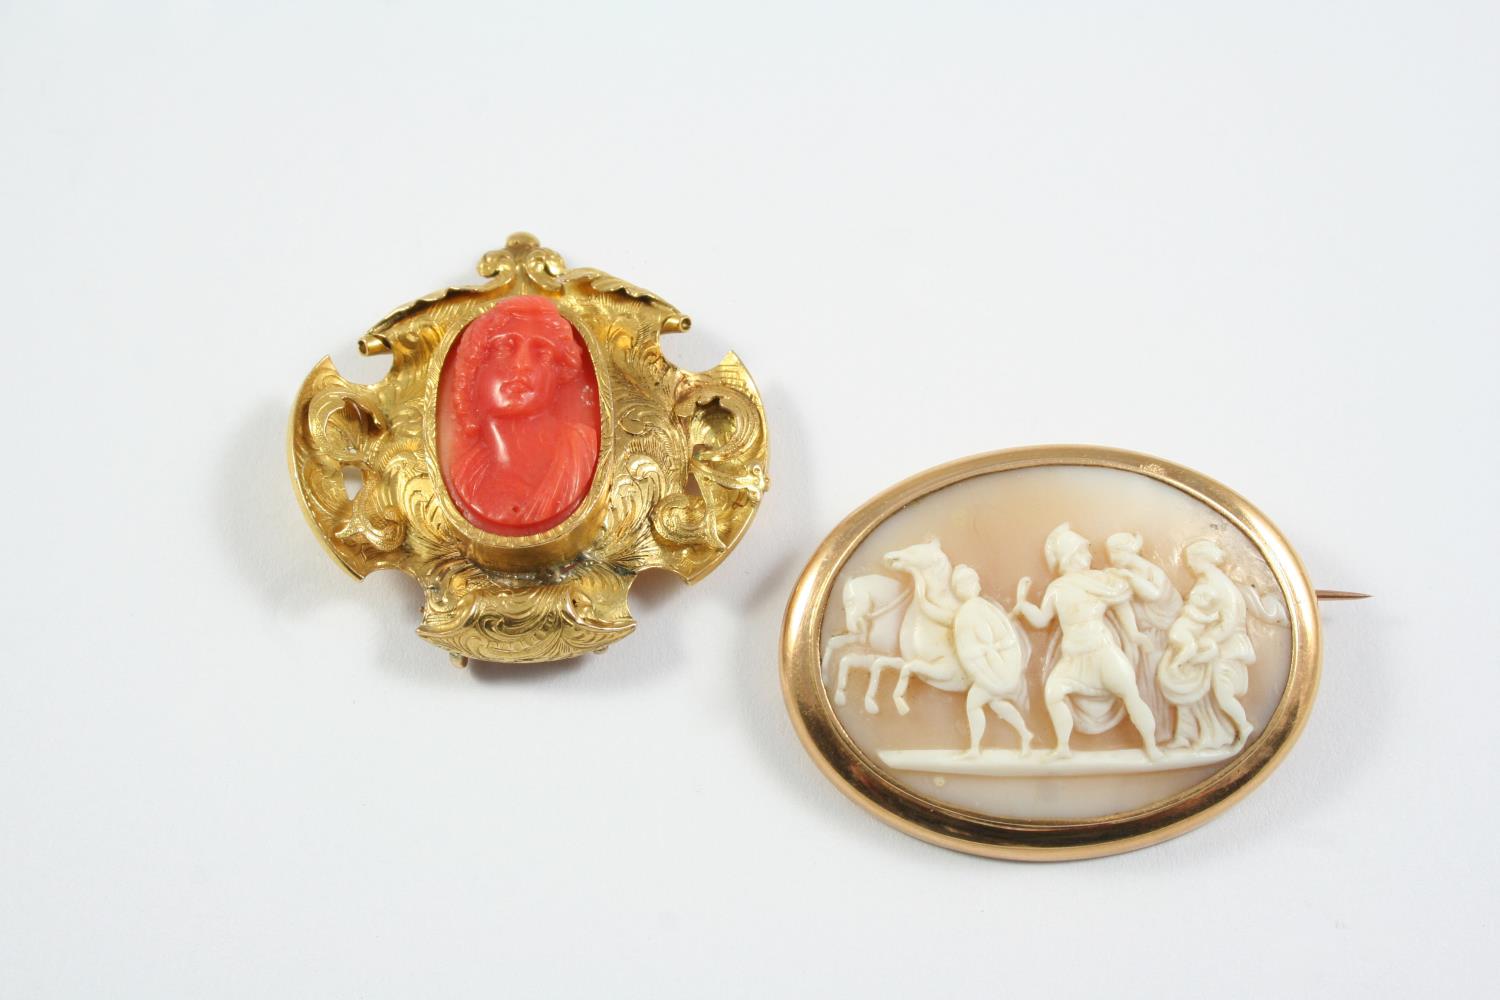 A CARVED CORAL CAMEO BROOCH depicting a classical woman, mounted in an ornate gold frame, 4cm